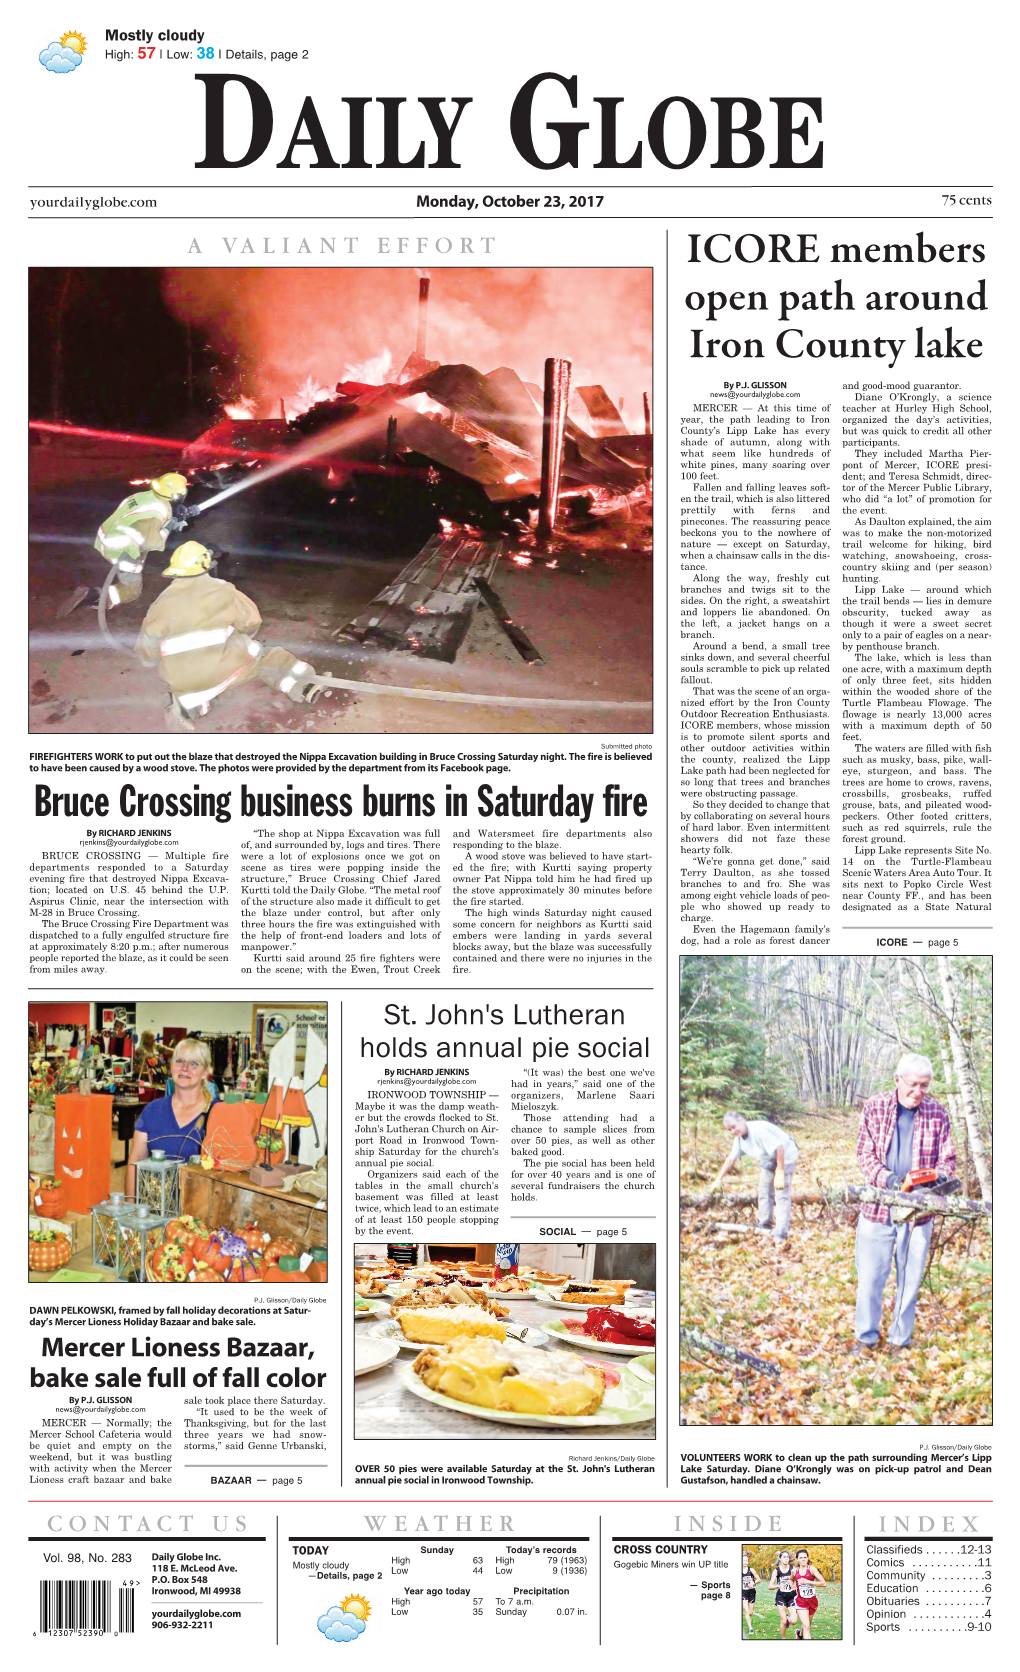 Bruce Crossing Business Burns in Saturday Fire by Collaborating on Several Hours Peckers